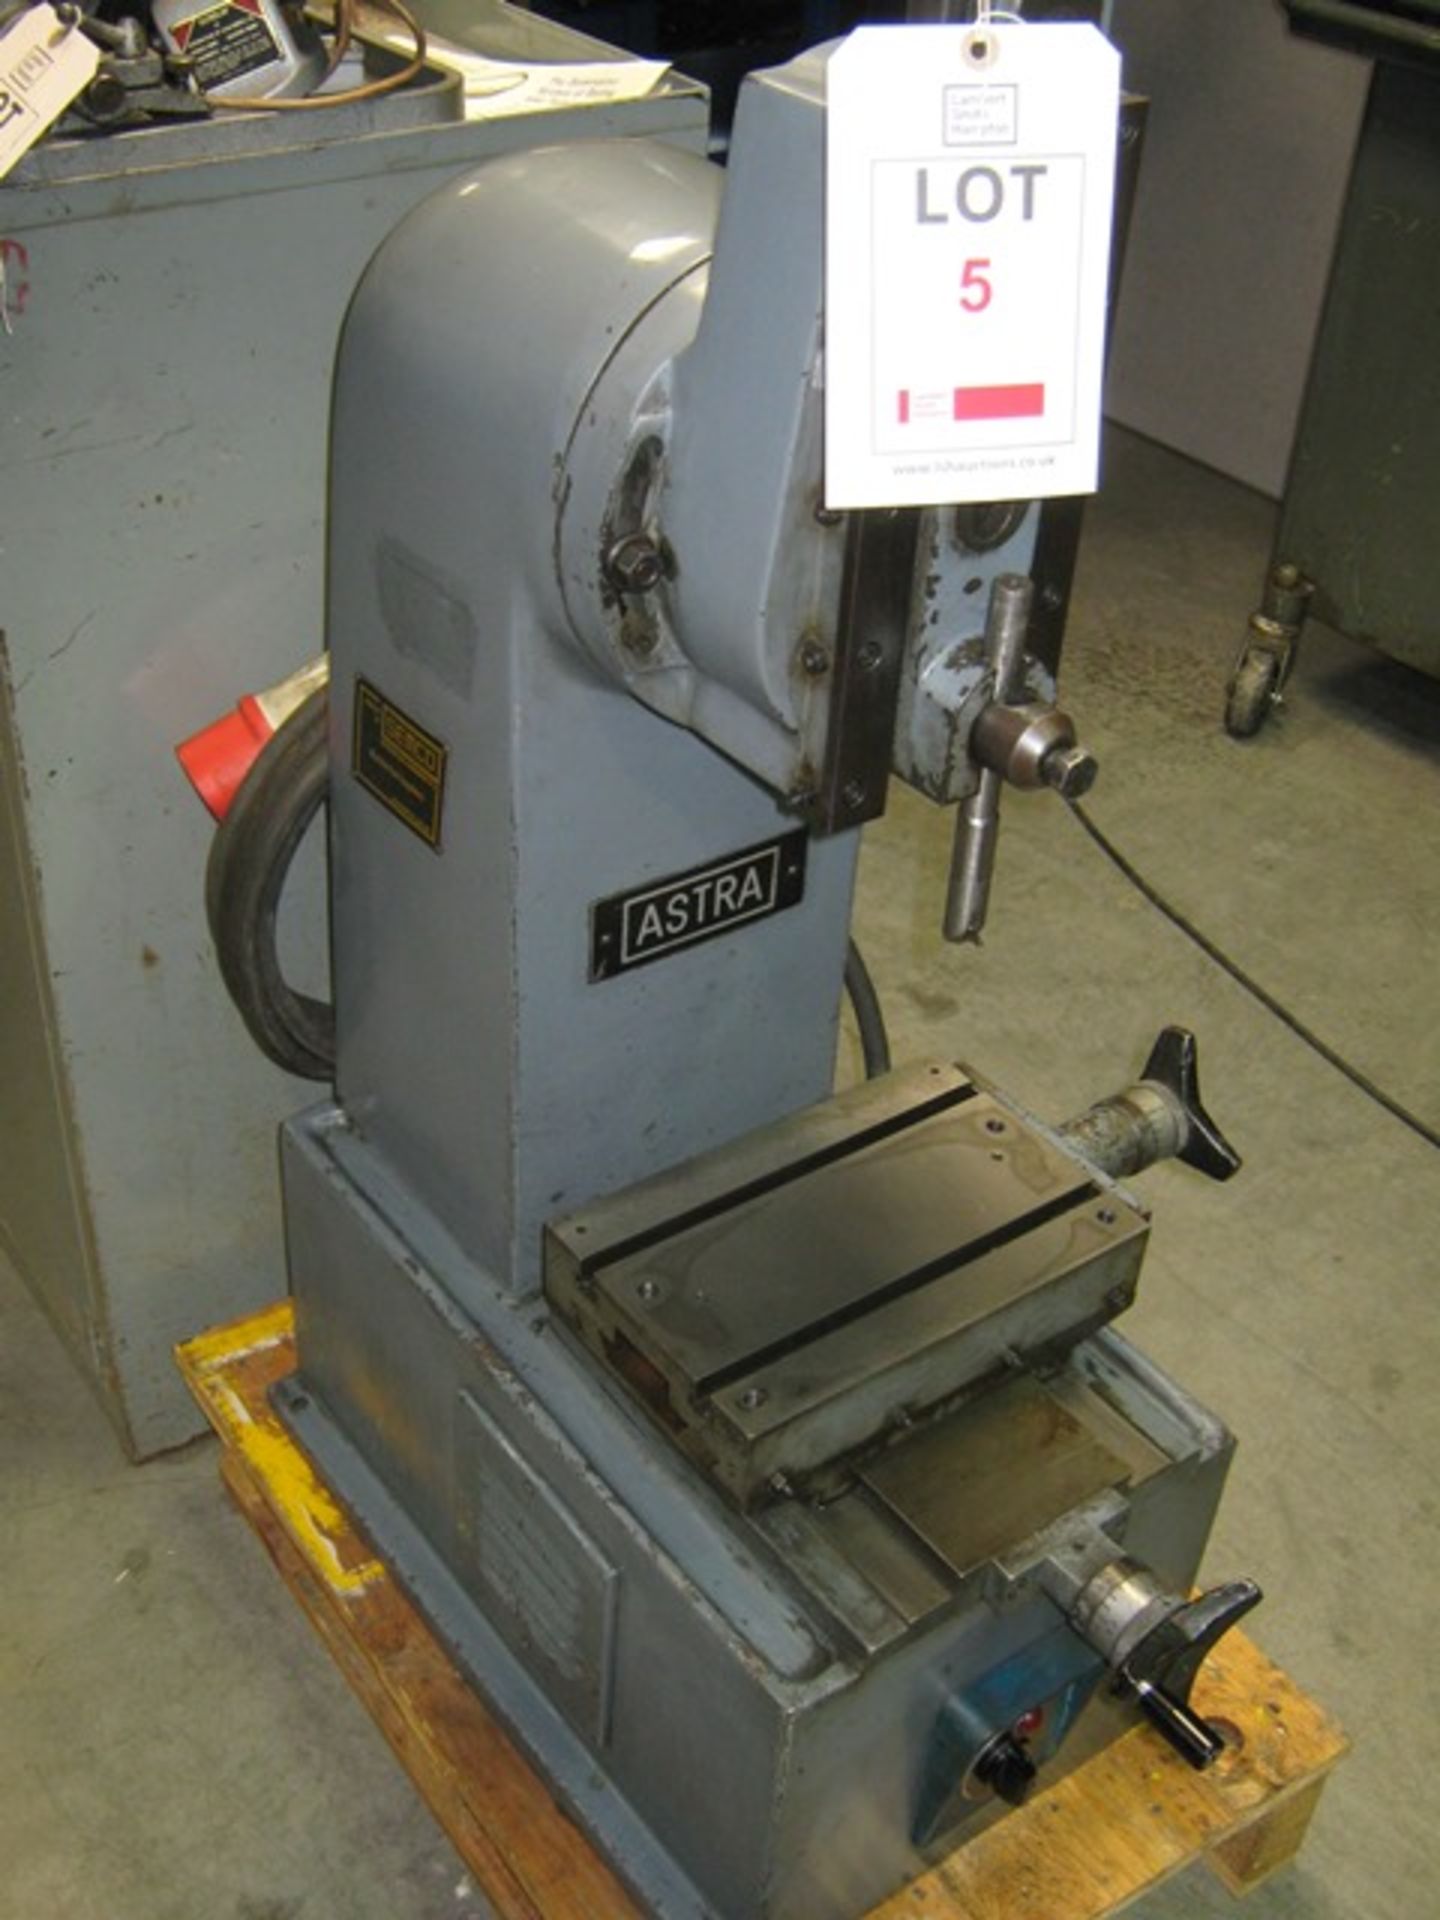 Astra slotting machine with tilting head, 415v, table size 10" x 7"